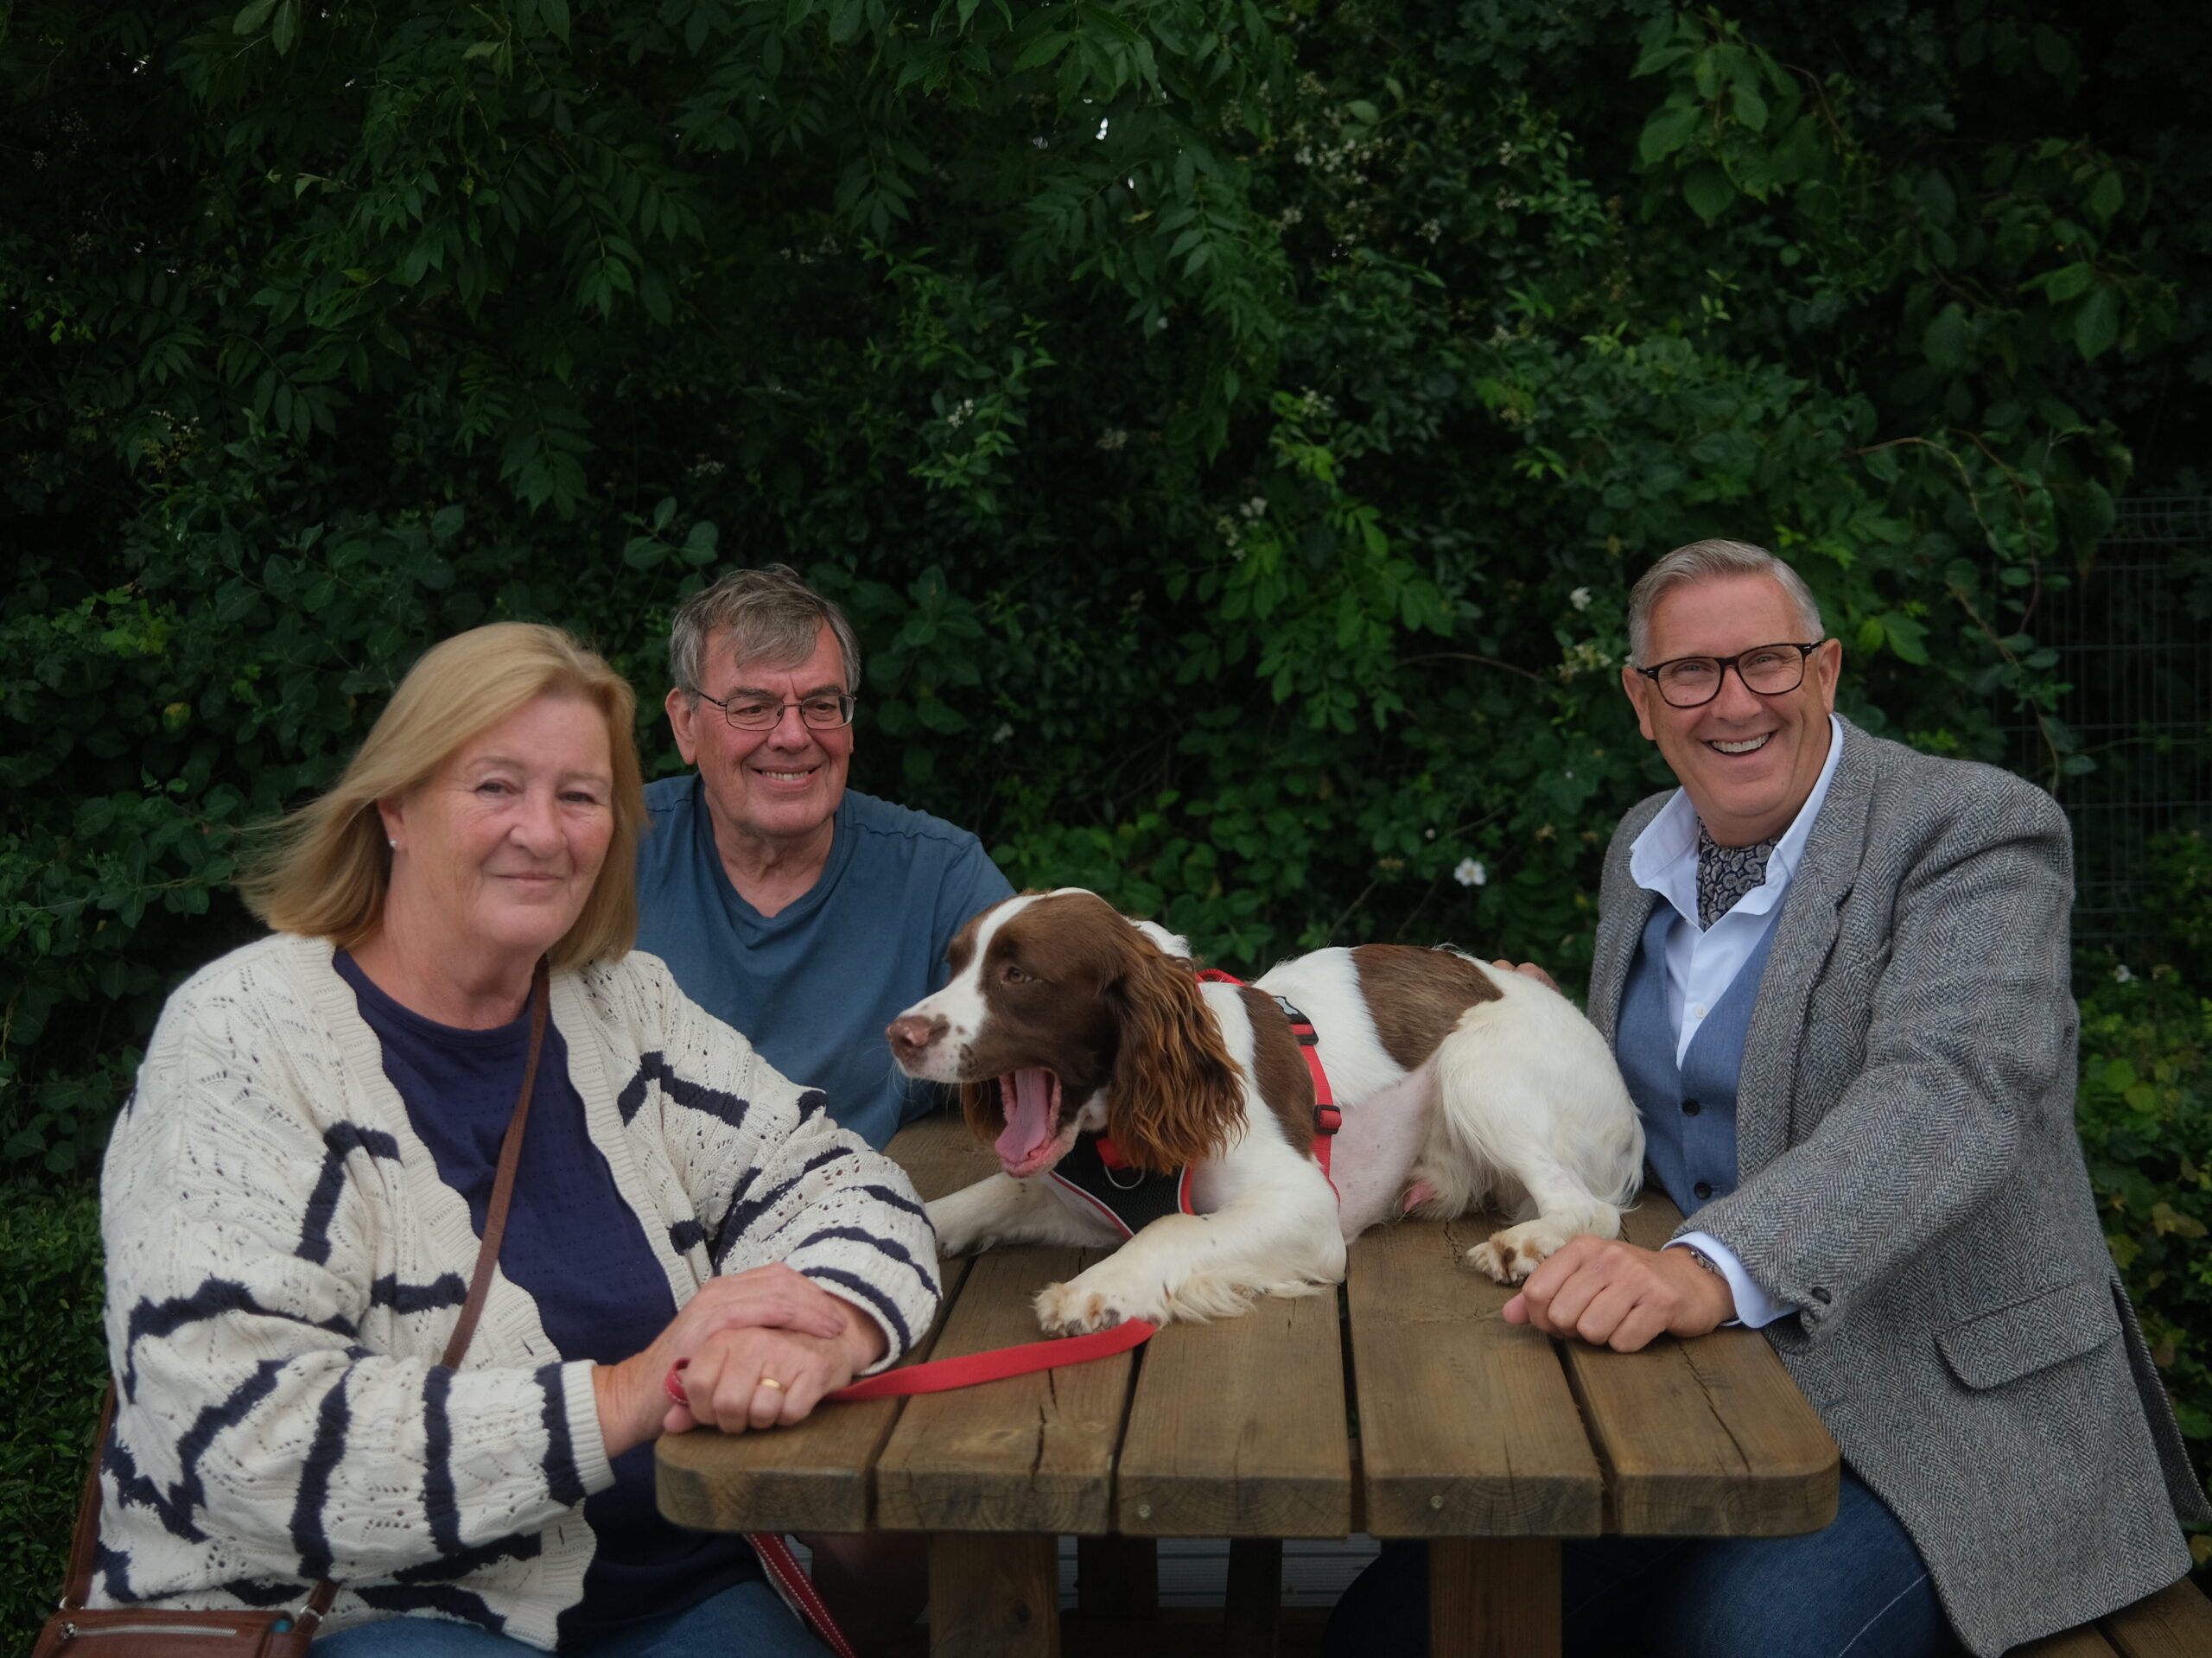 An image of Louie, a springer spaniel dog, sat on a picnic table. Seated to the left is Louie's owners, Kevin and Nicky Blythe, to the right is Graeme Hall, presenter of the Dog Hospital with Graeme Hall